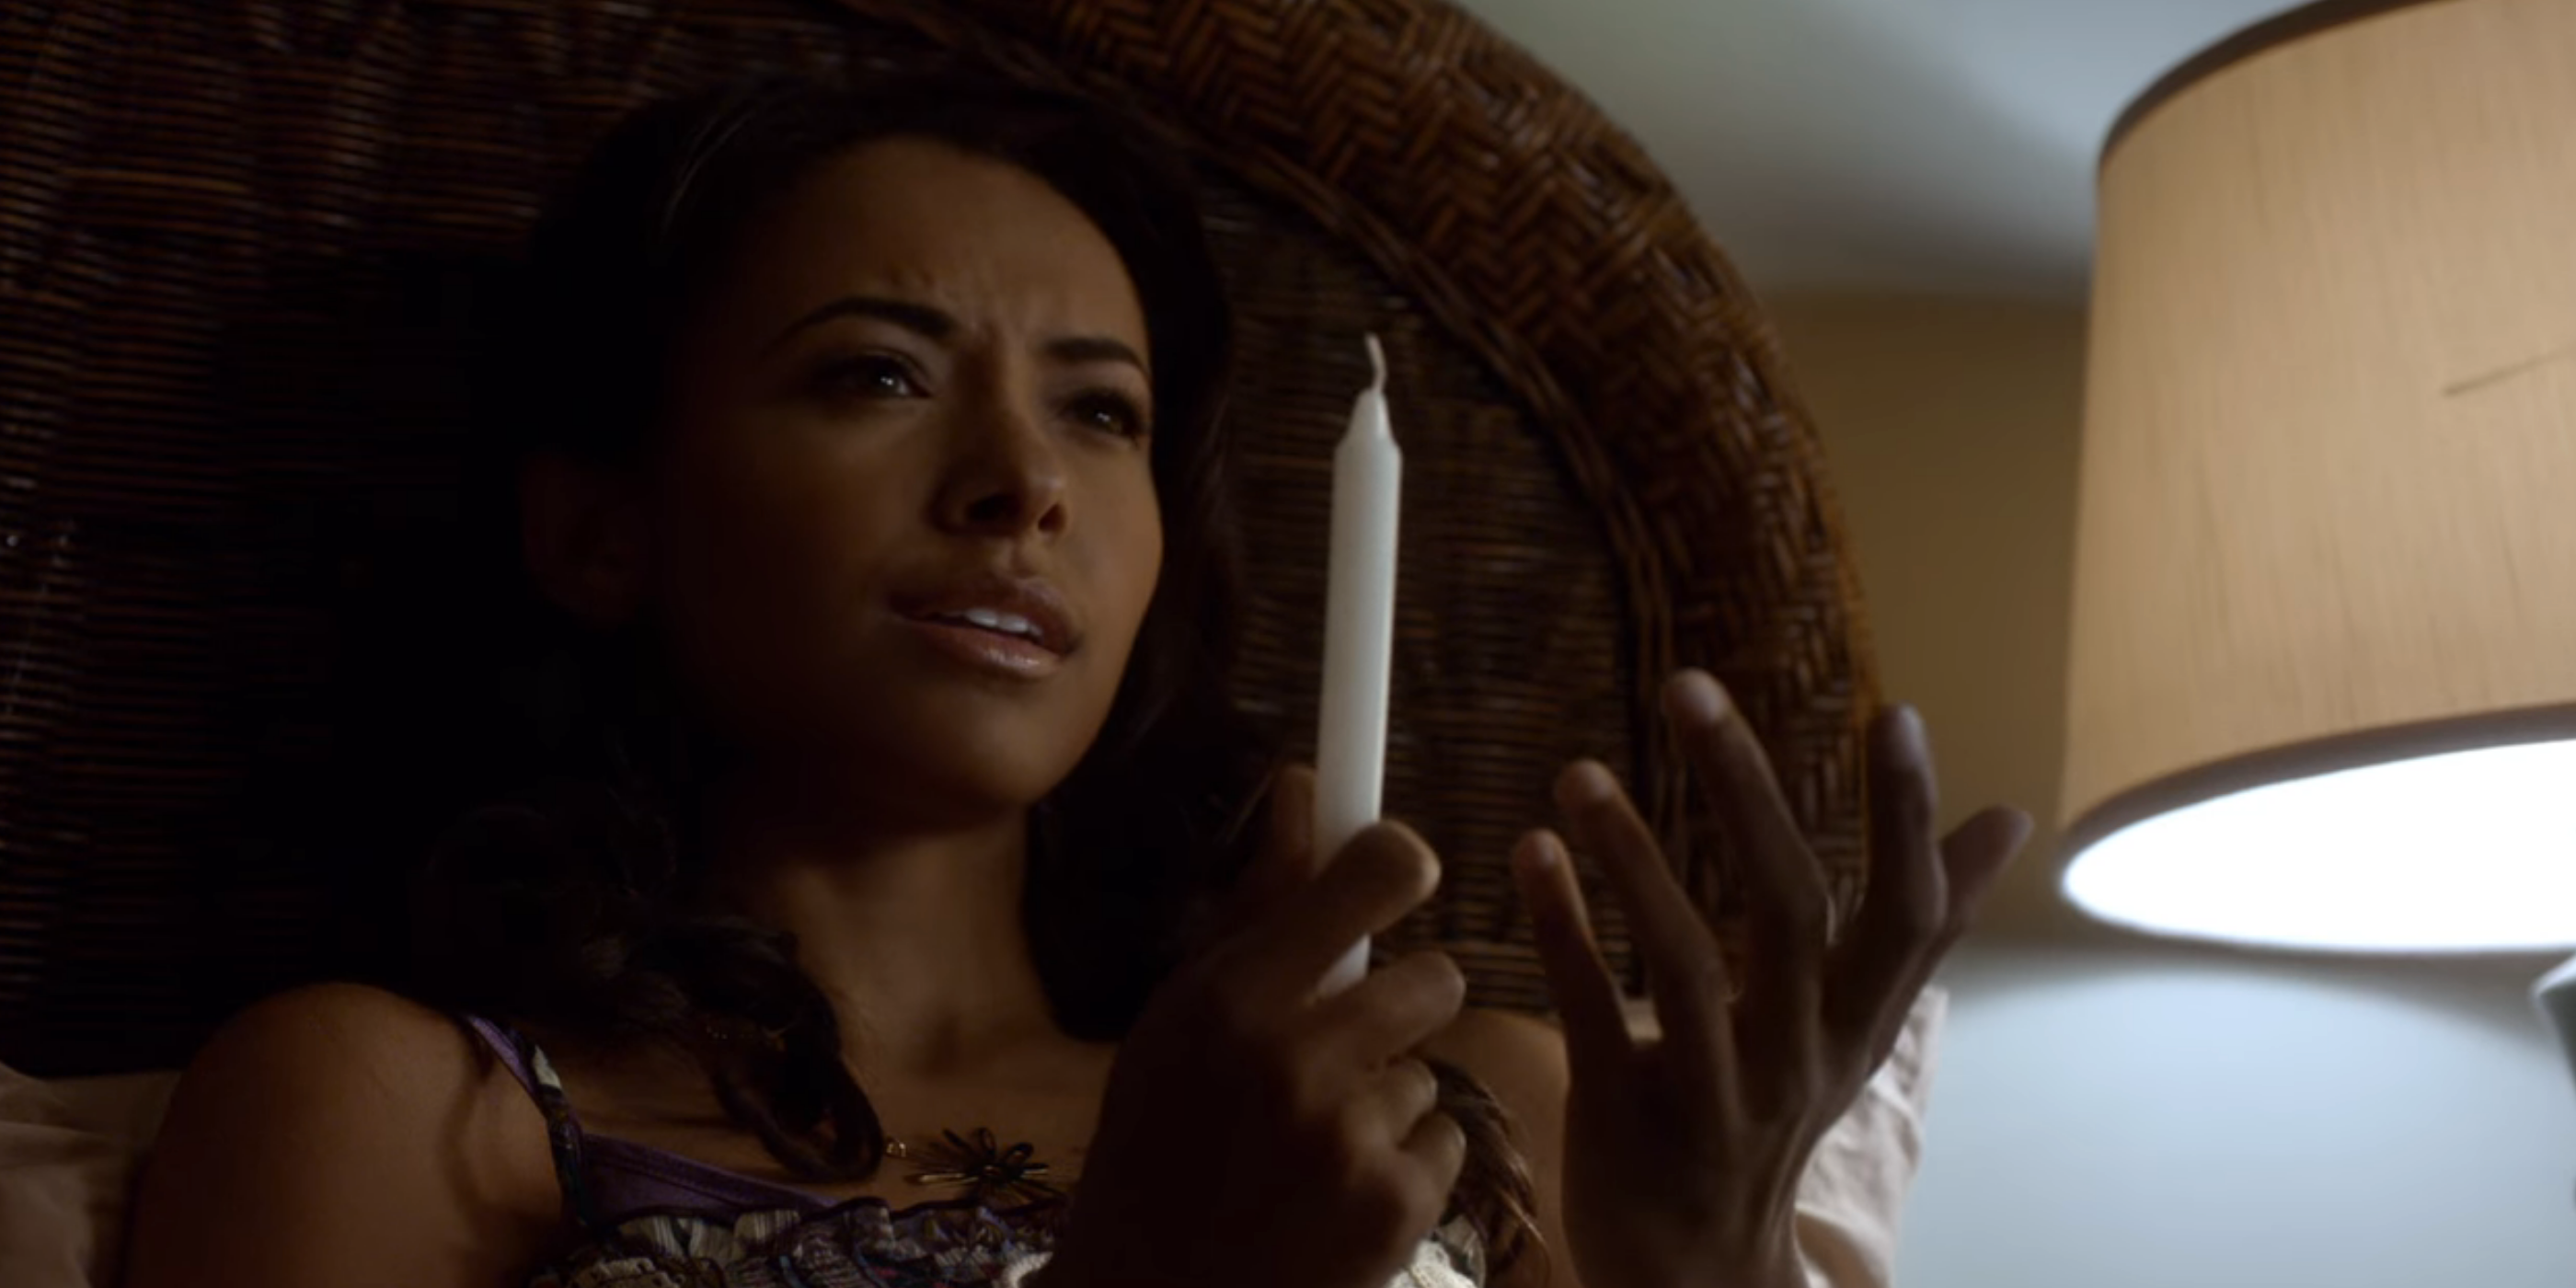 Bonnie holding a candle in The Vampire Diaries.